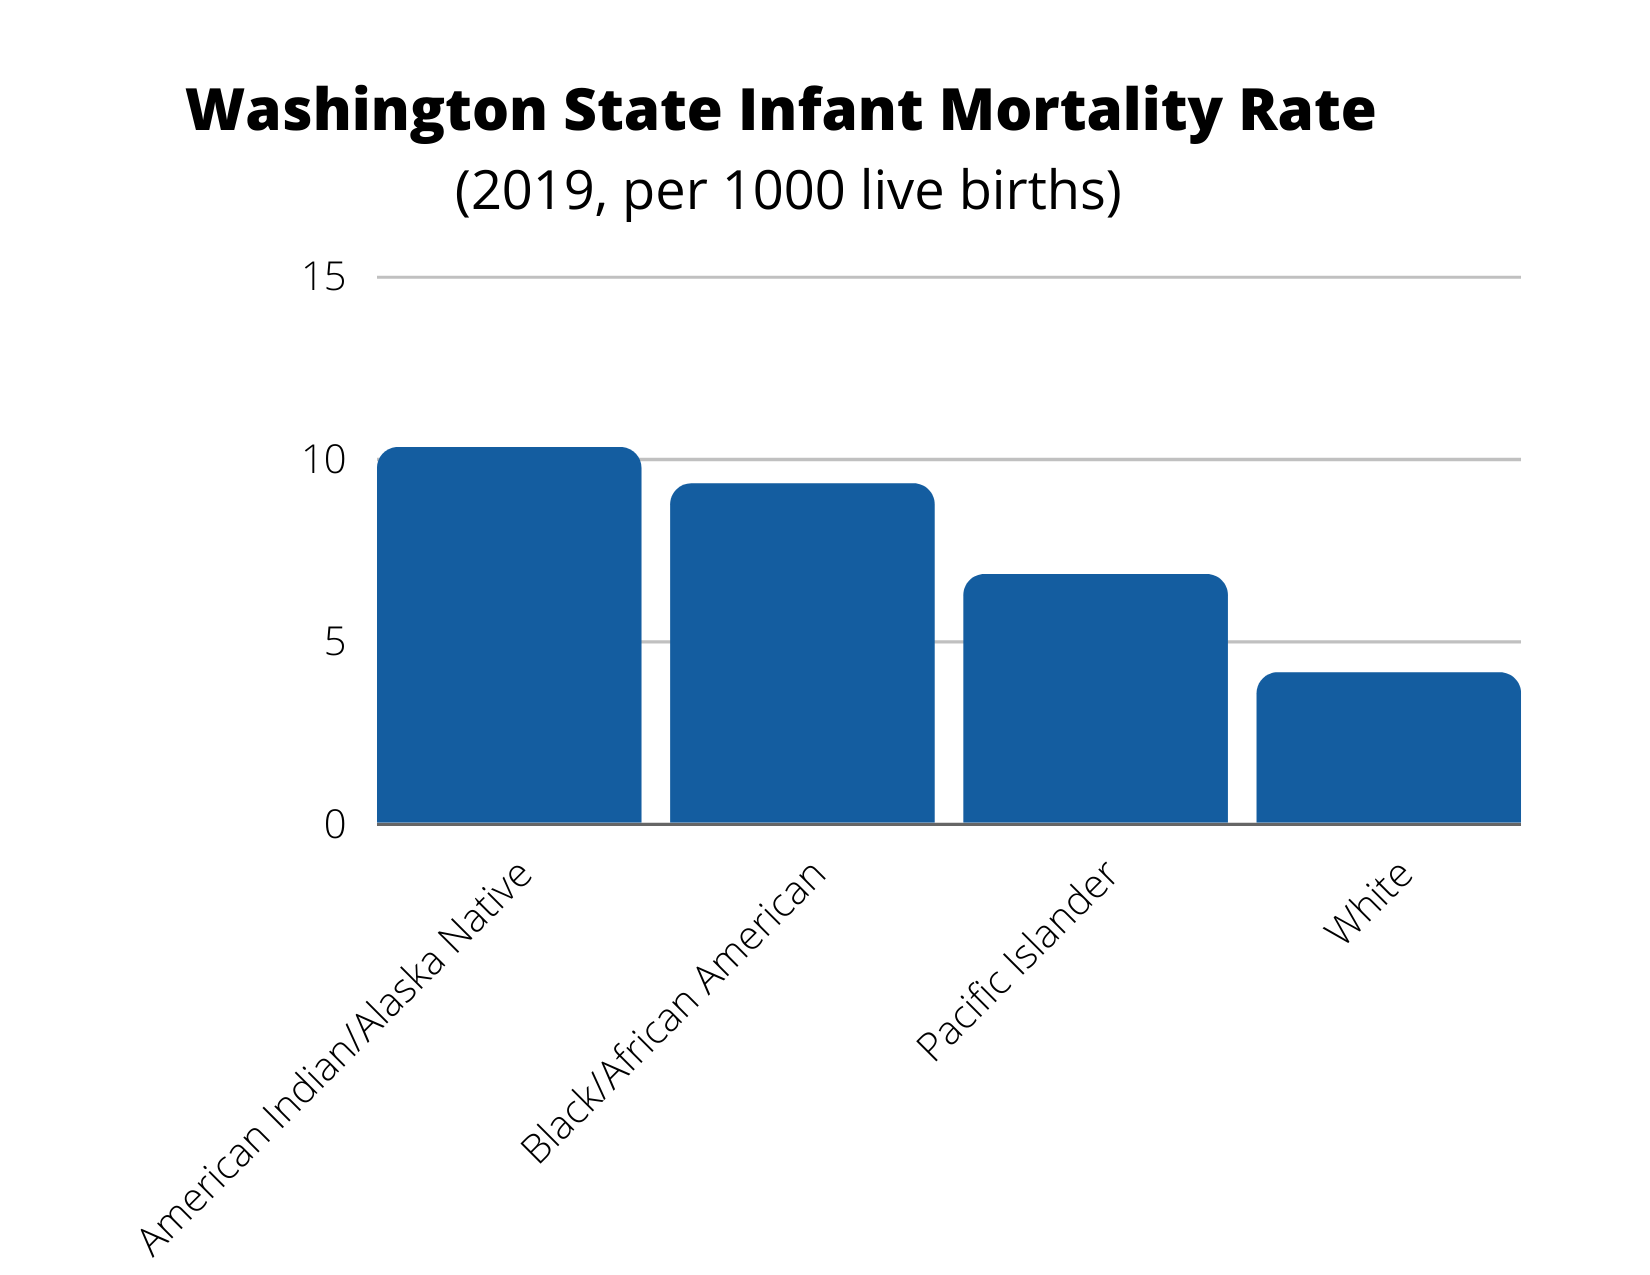 chart for Washington state infant mortality rate. 2019, per 1000 live births